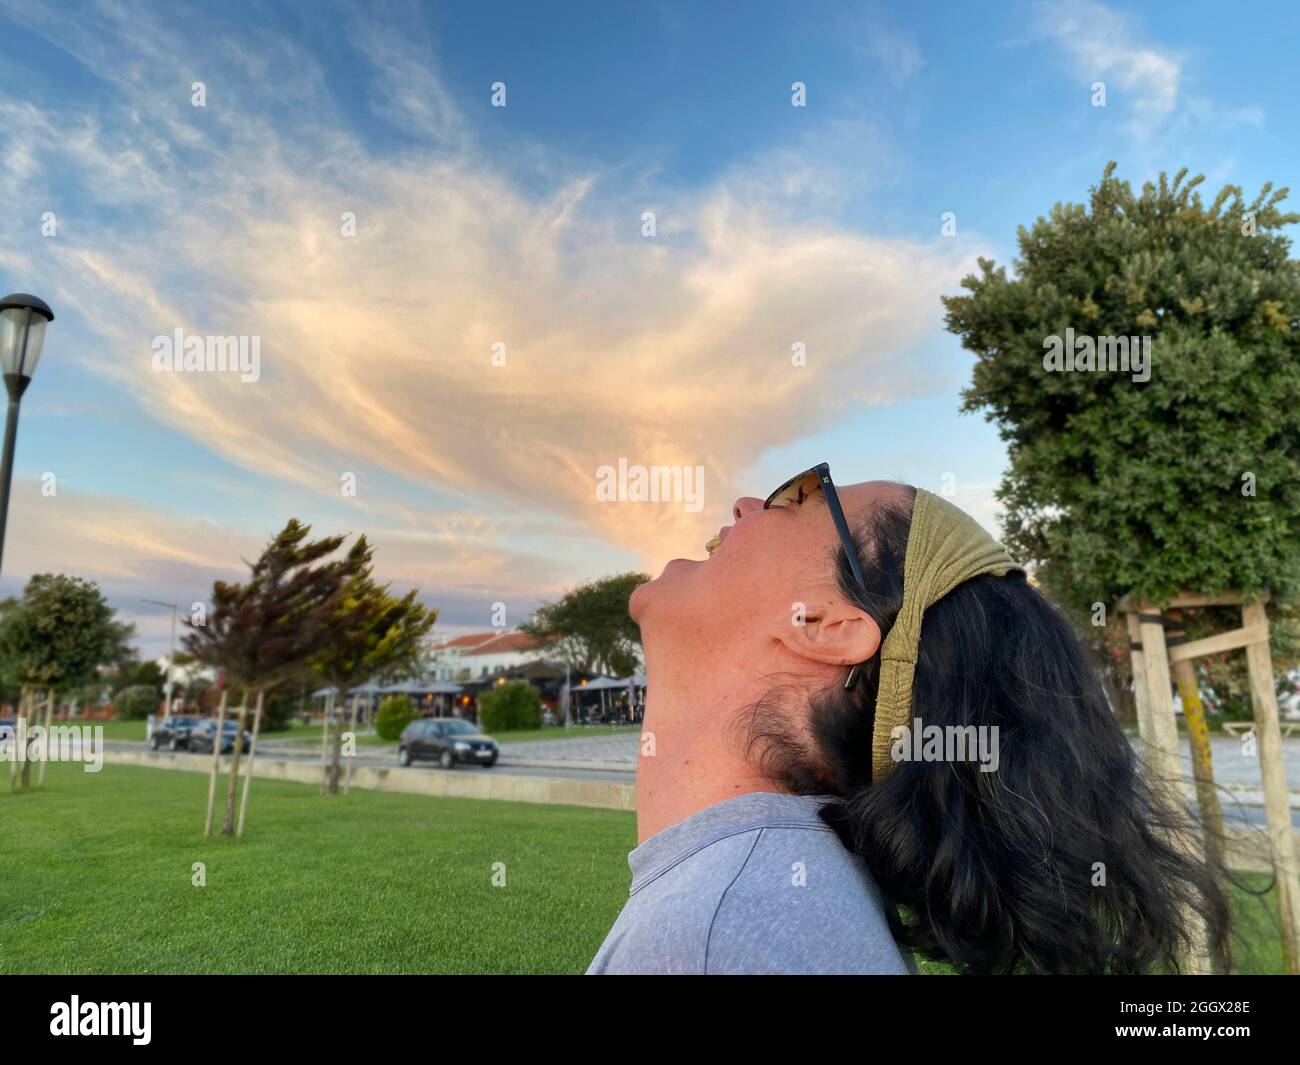 Optical illusion of woman eating a cloud. Stock Photo